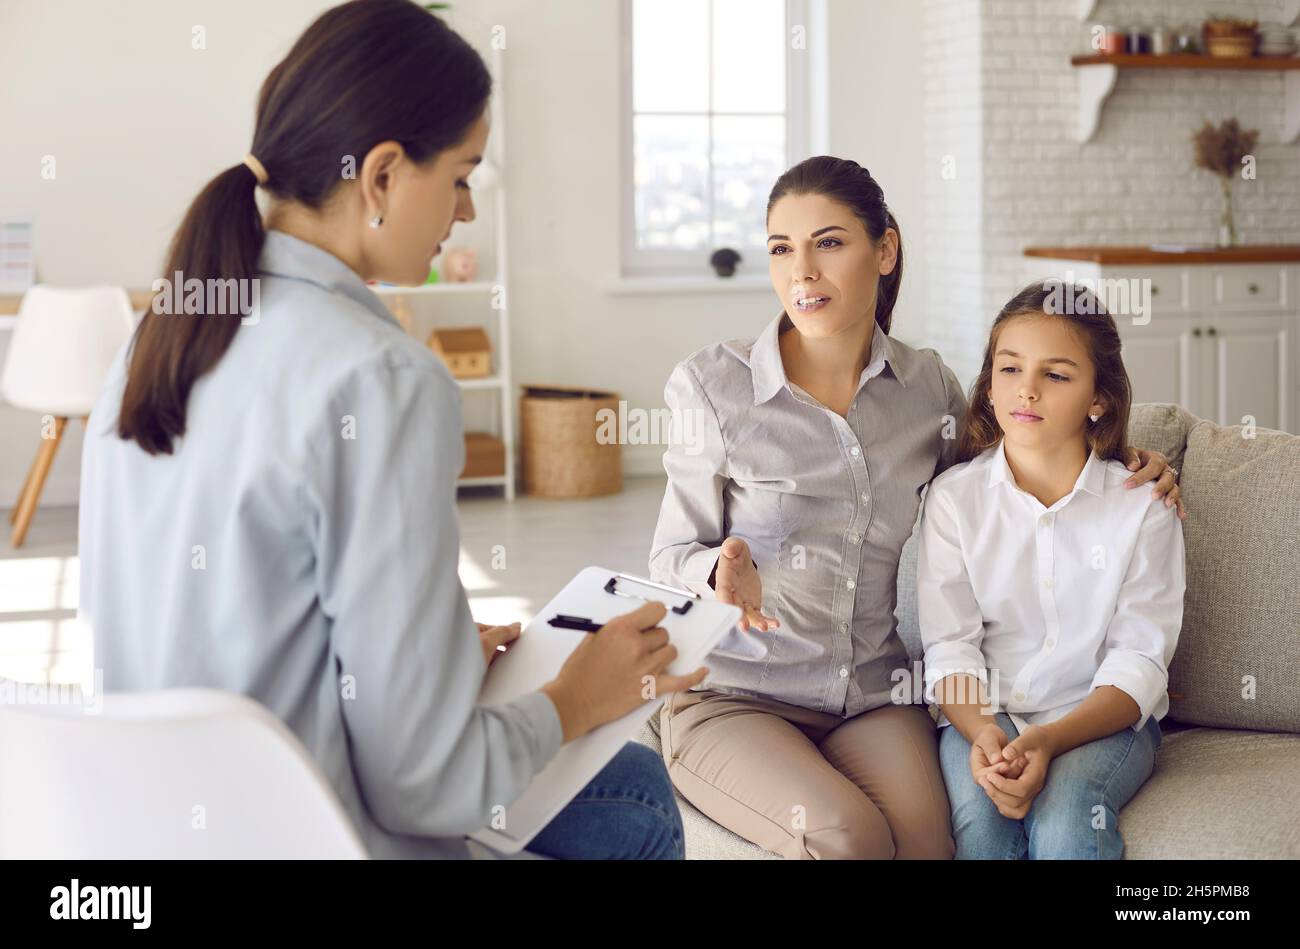 Parent talking to counseling therapist or psychologist about child's behavior problems Stock Photo